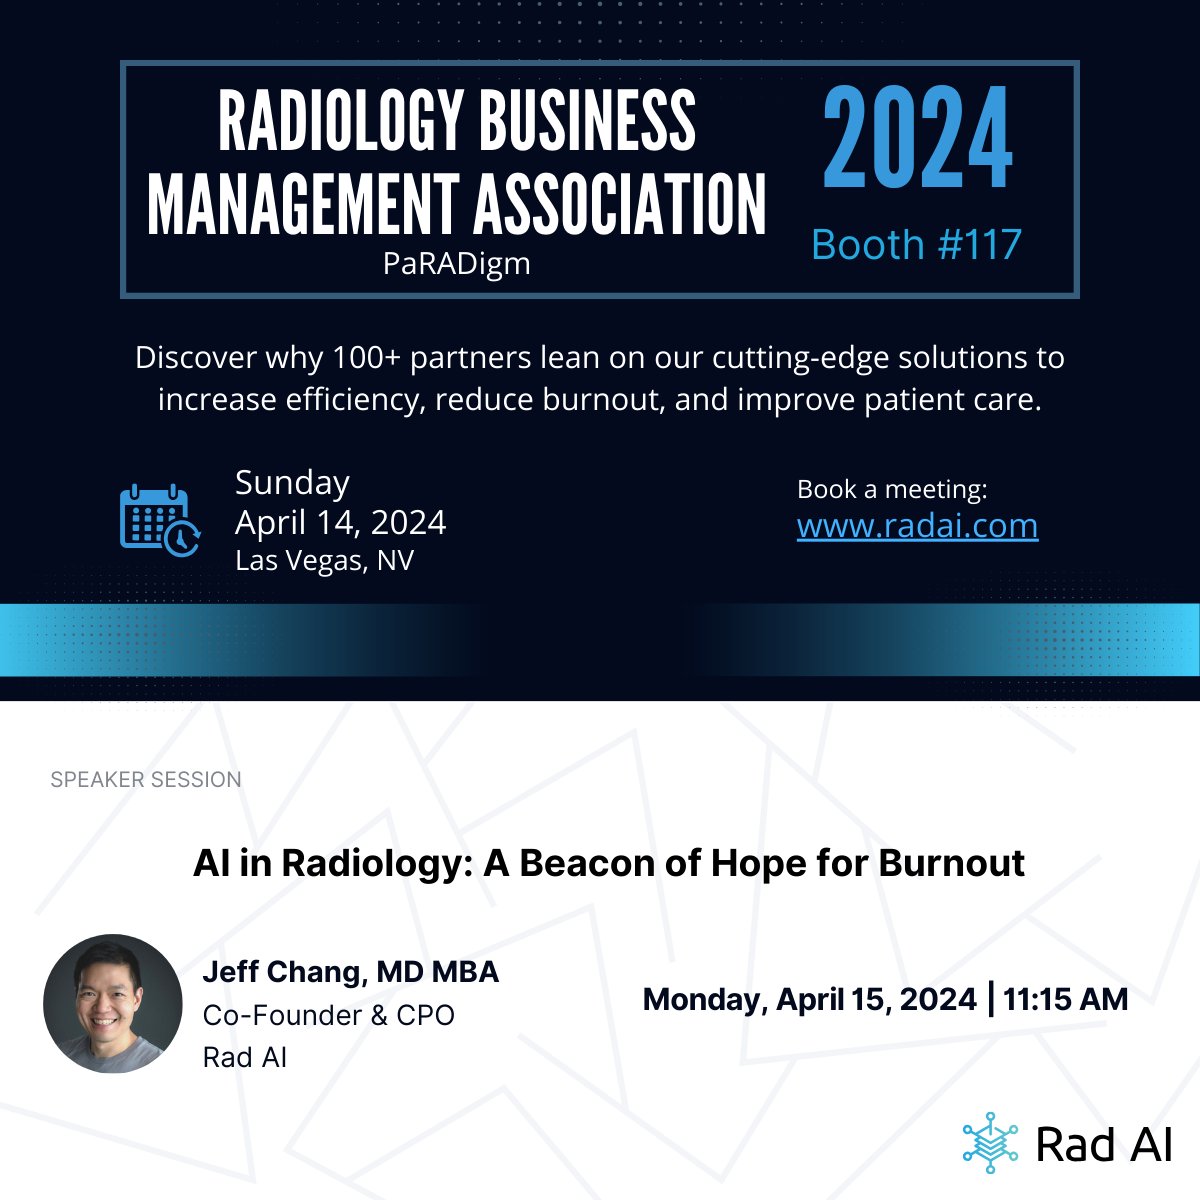 We're proud to support another annual RBMA #PaRADigm meeting! Our team is excited to chat with radiology business leaders looking to move their practice forward, Schedule a dedicated time to demo our solutions at RBMA on our website by clicking 'Request Demo' from any page.